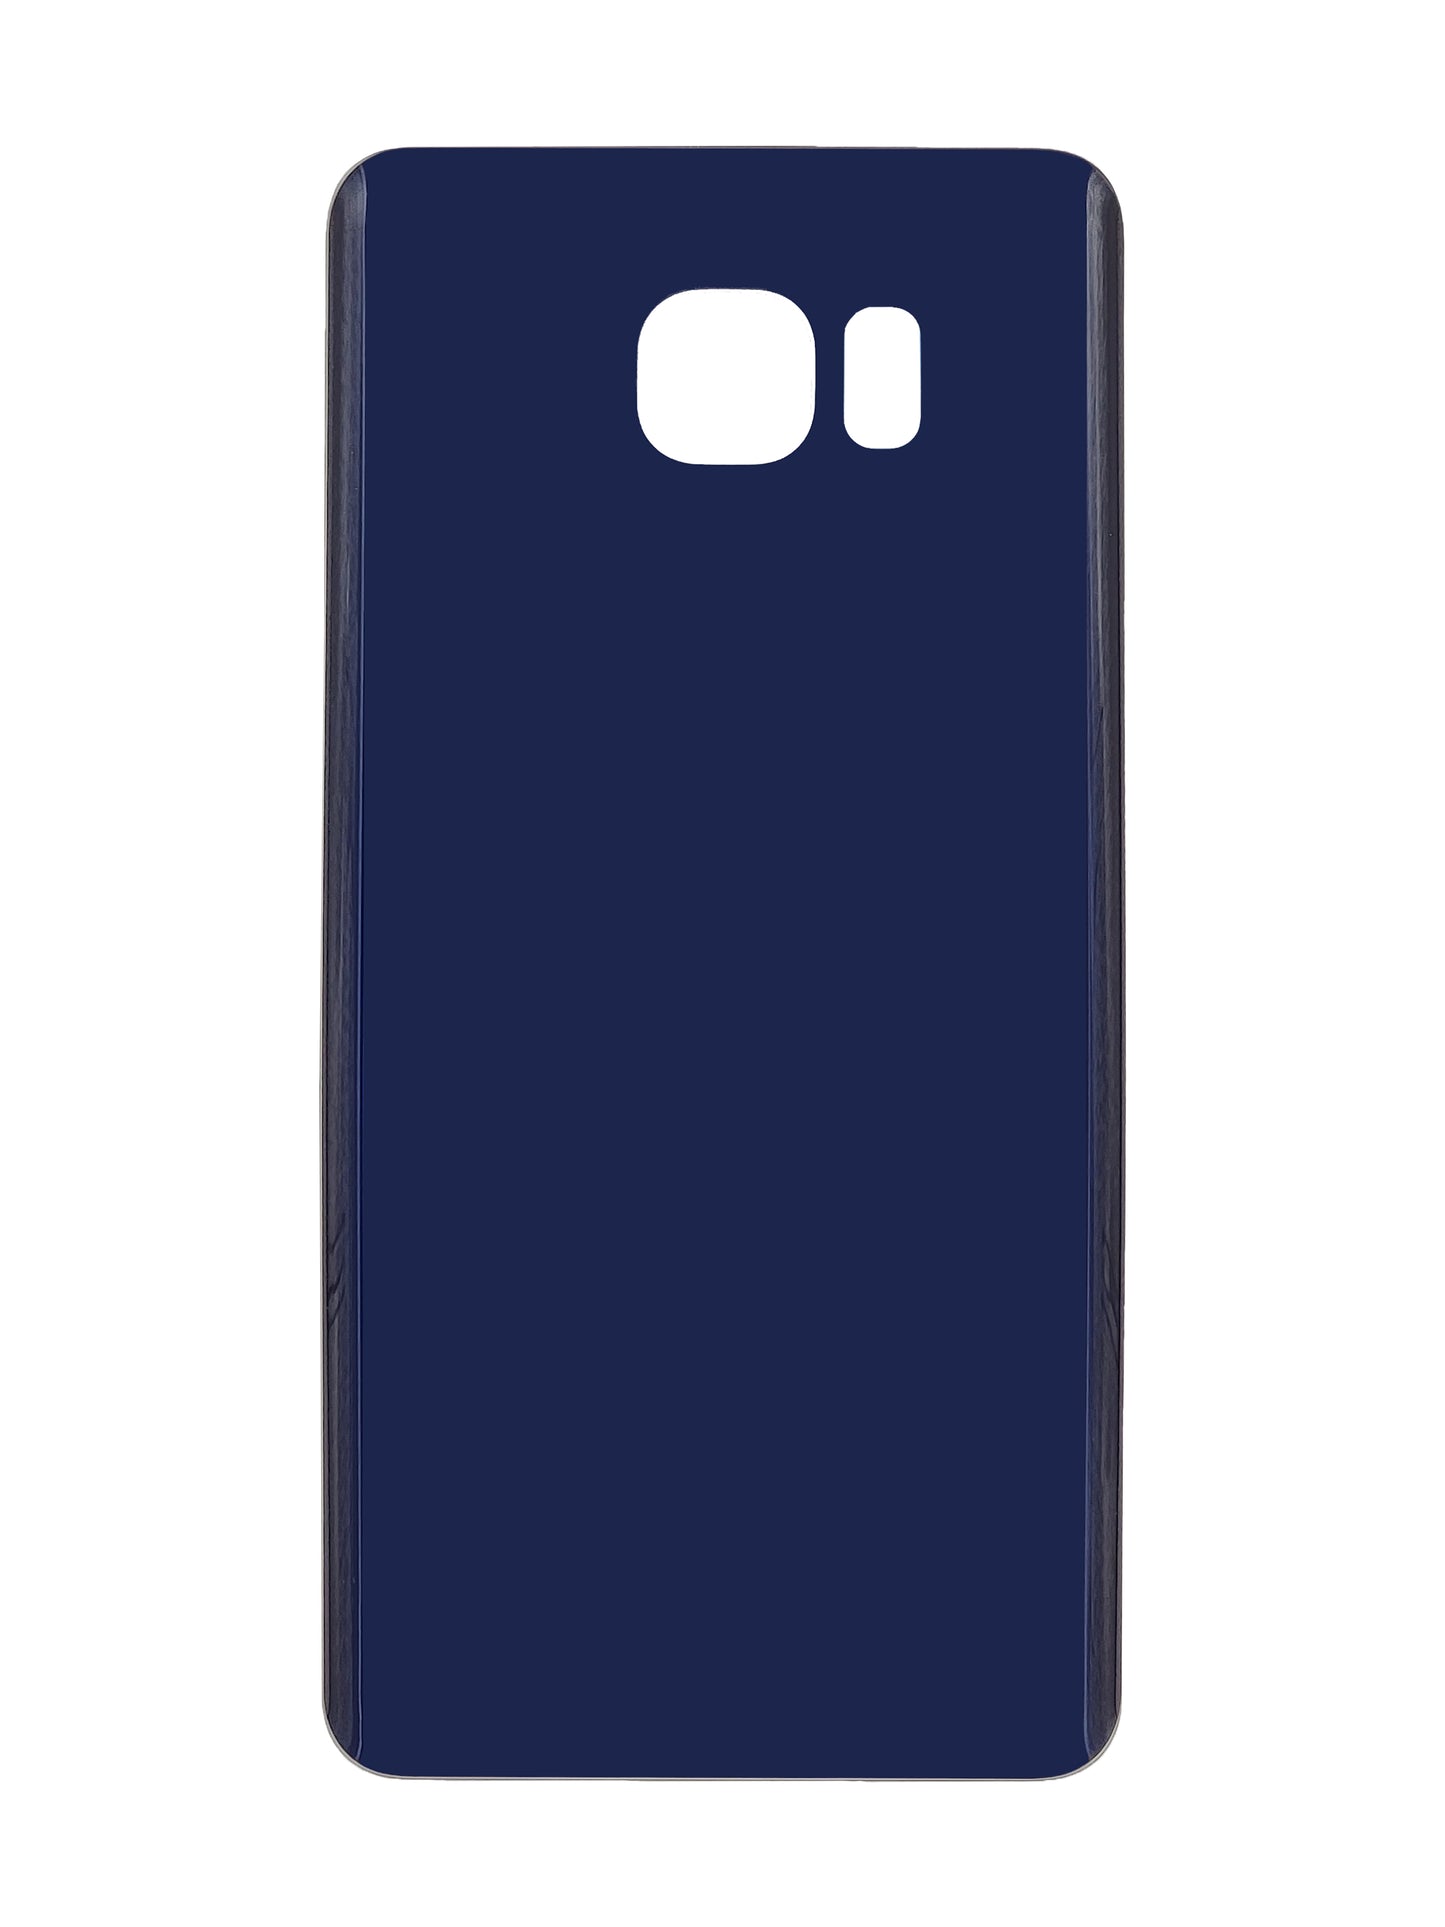 SGN Note 5 Back Cover (Blue)